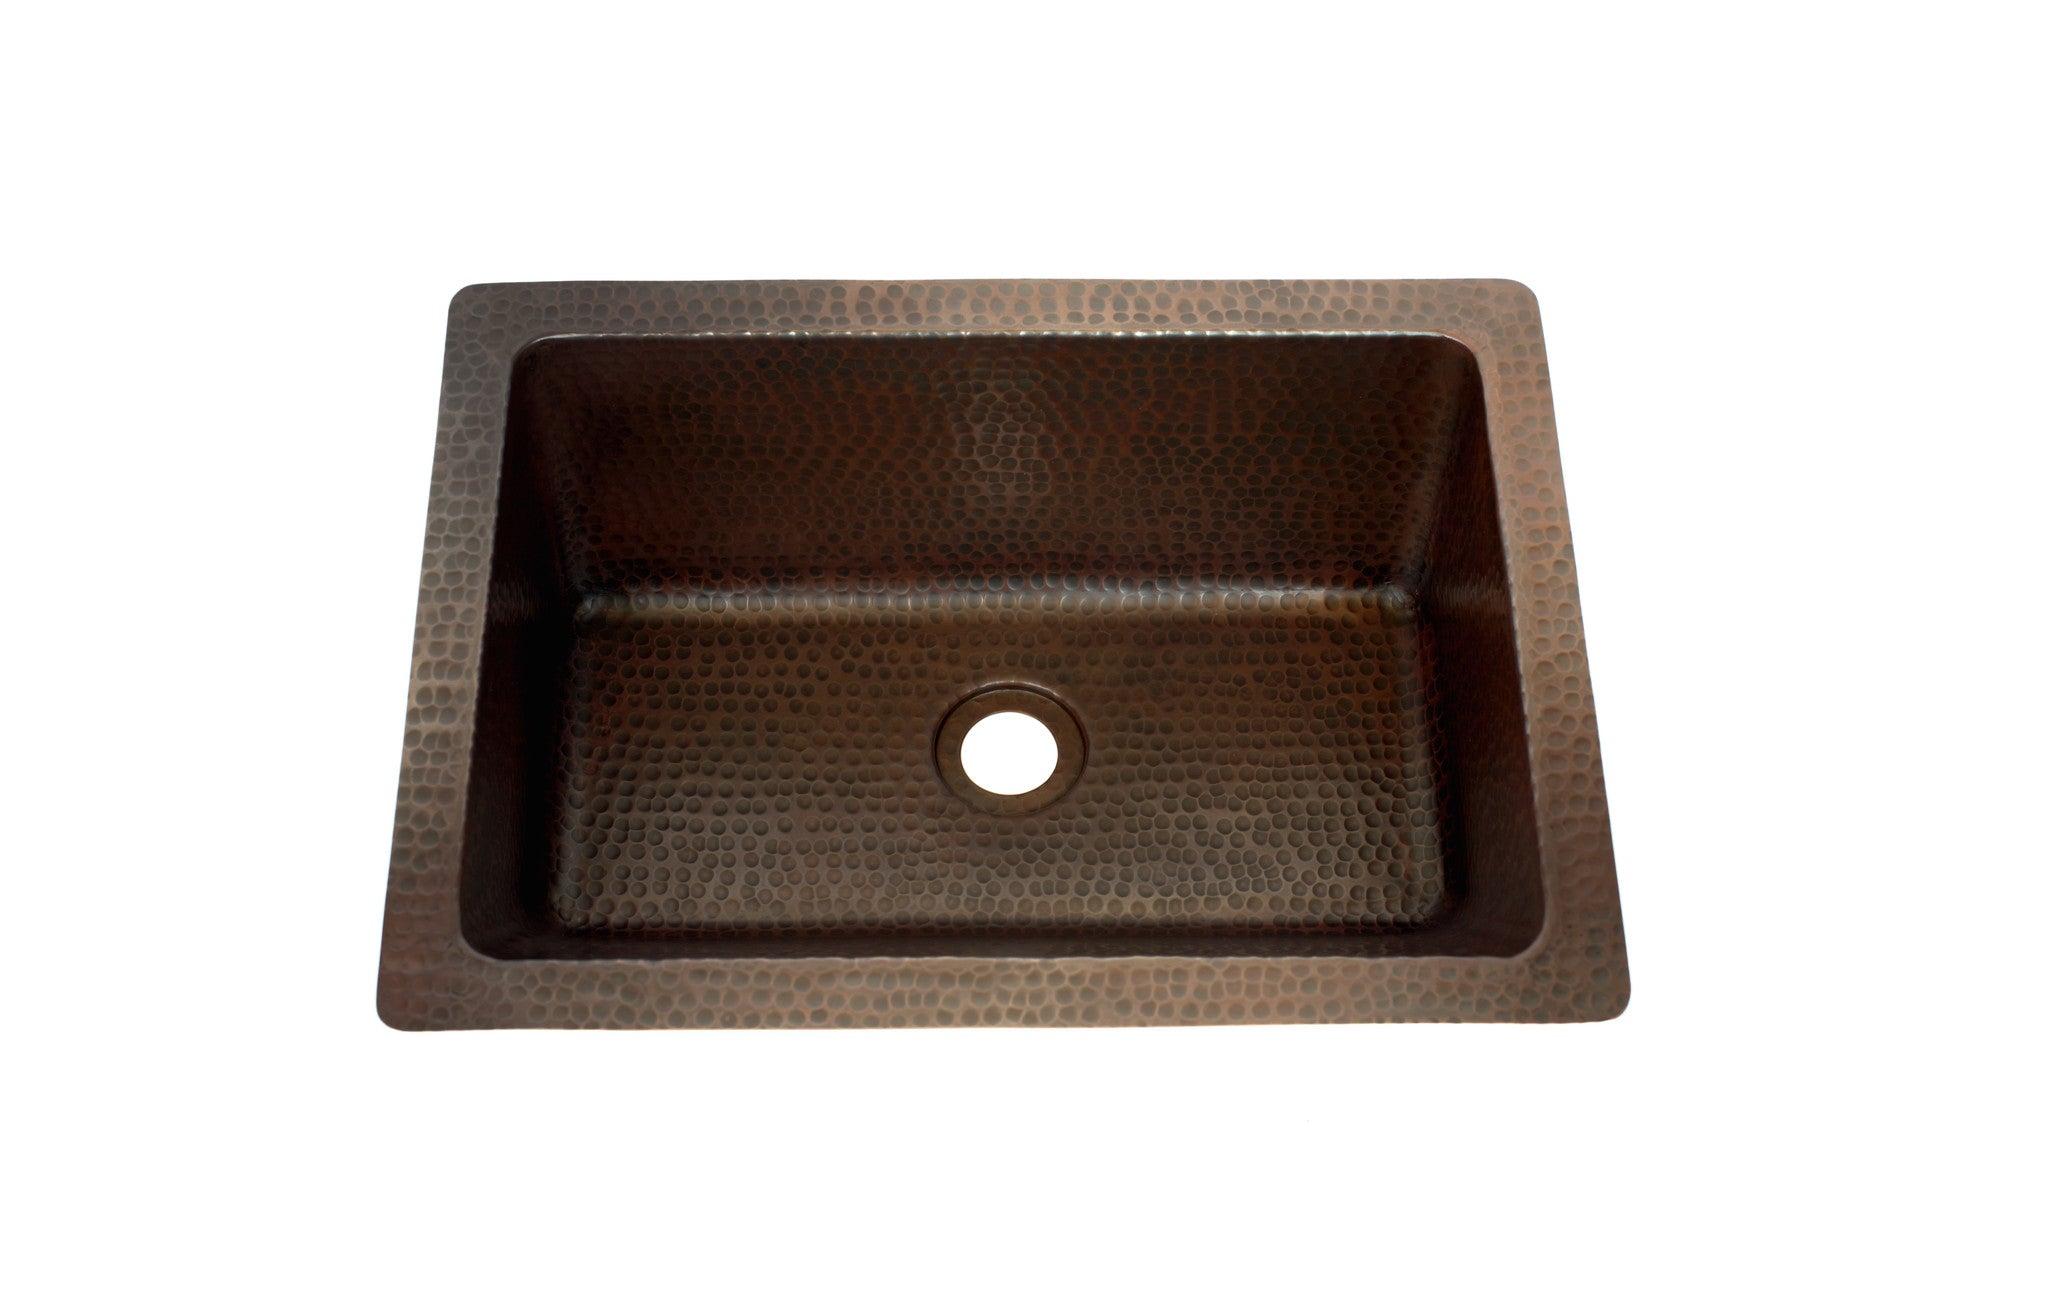 Oval Under Mount Bathroom Copper Sink with 1" Rolled Rim 19 x 14